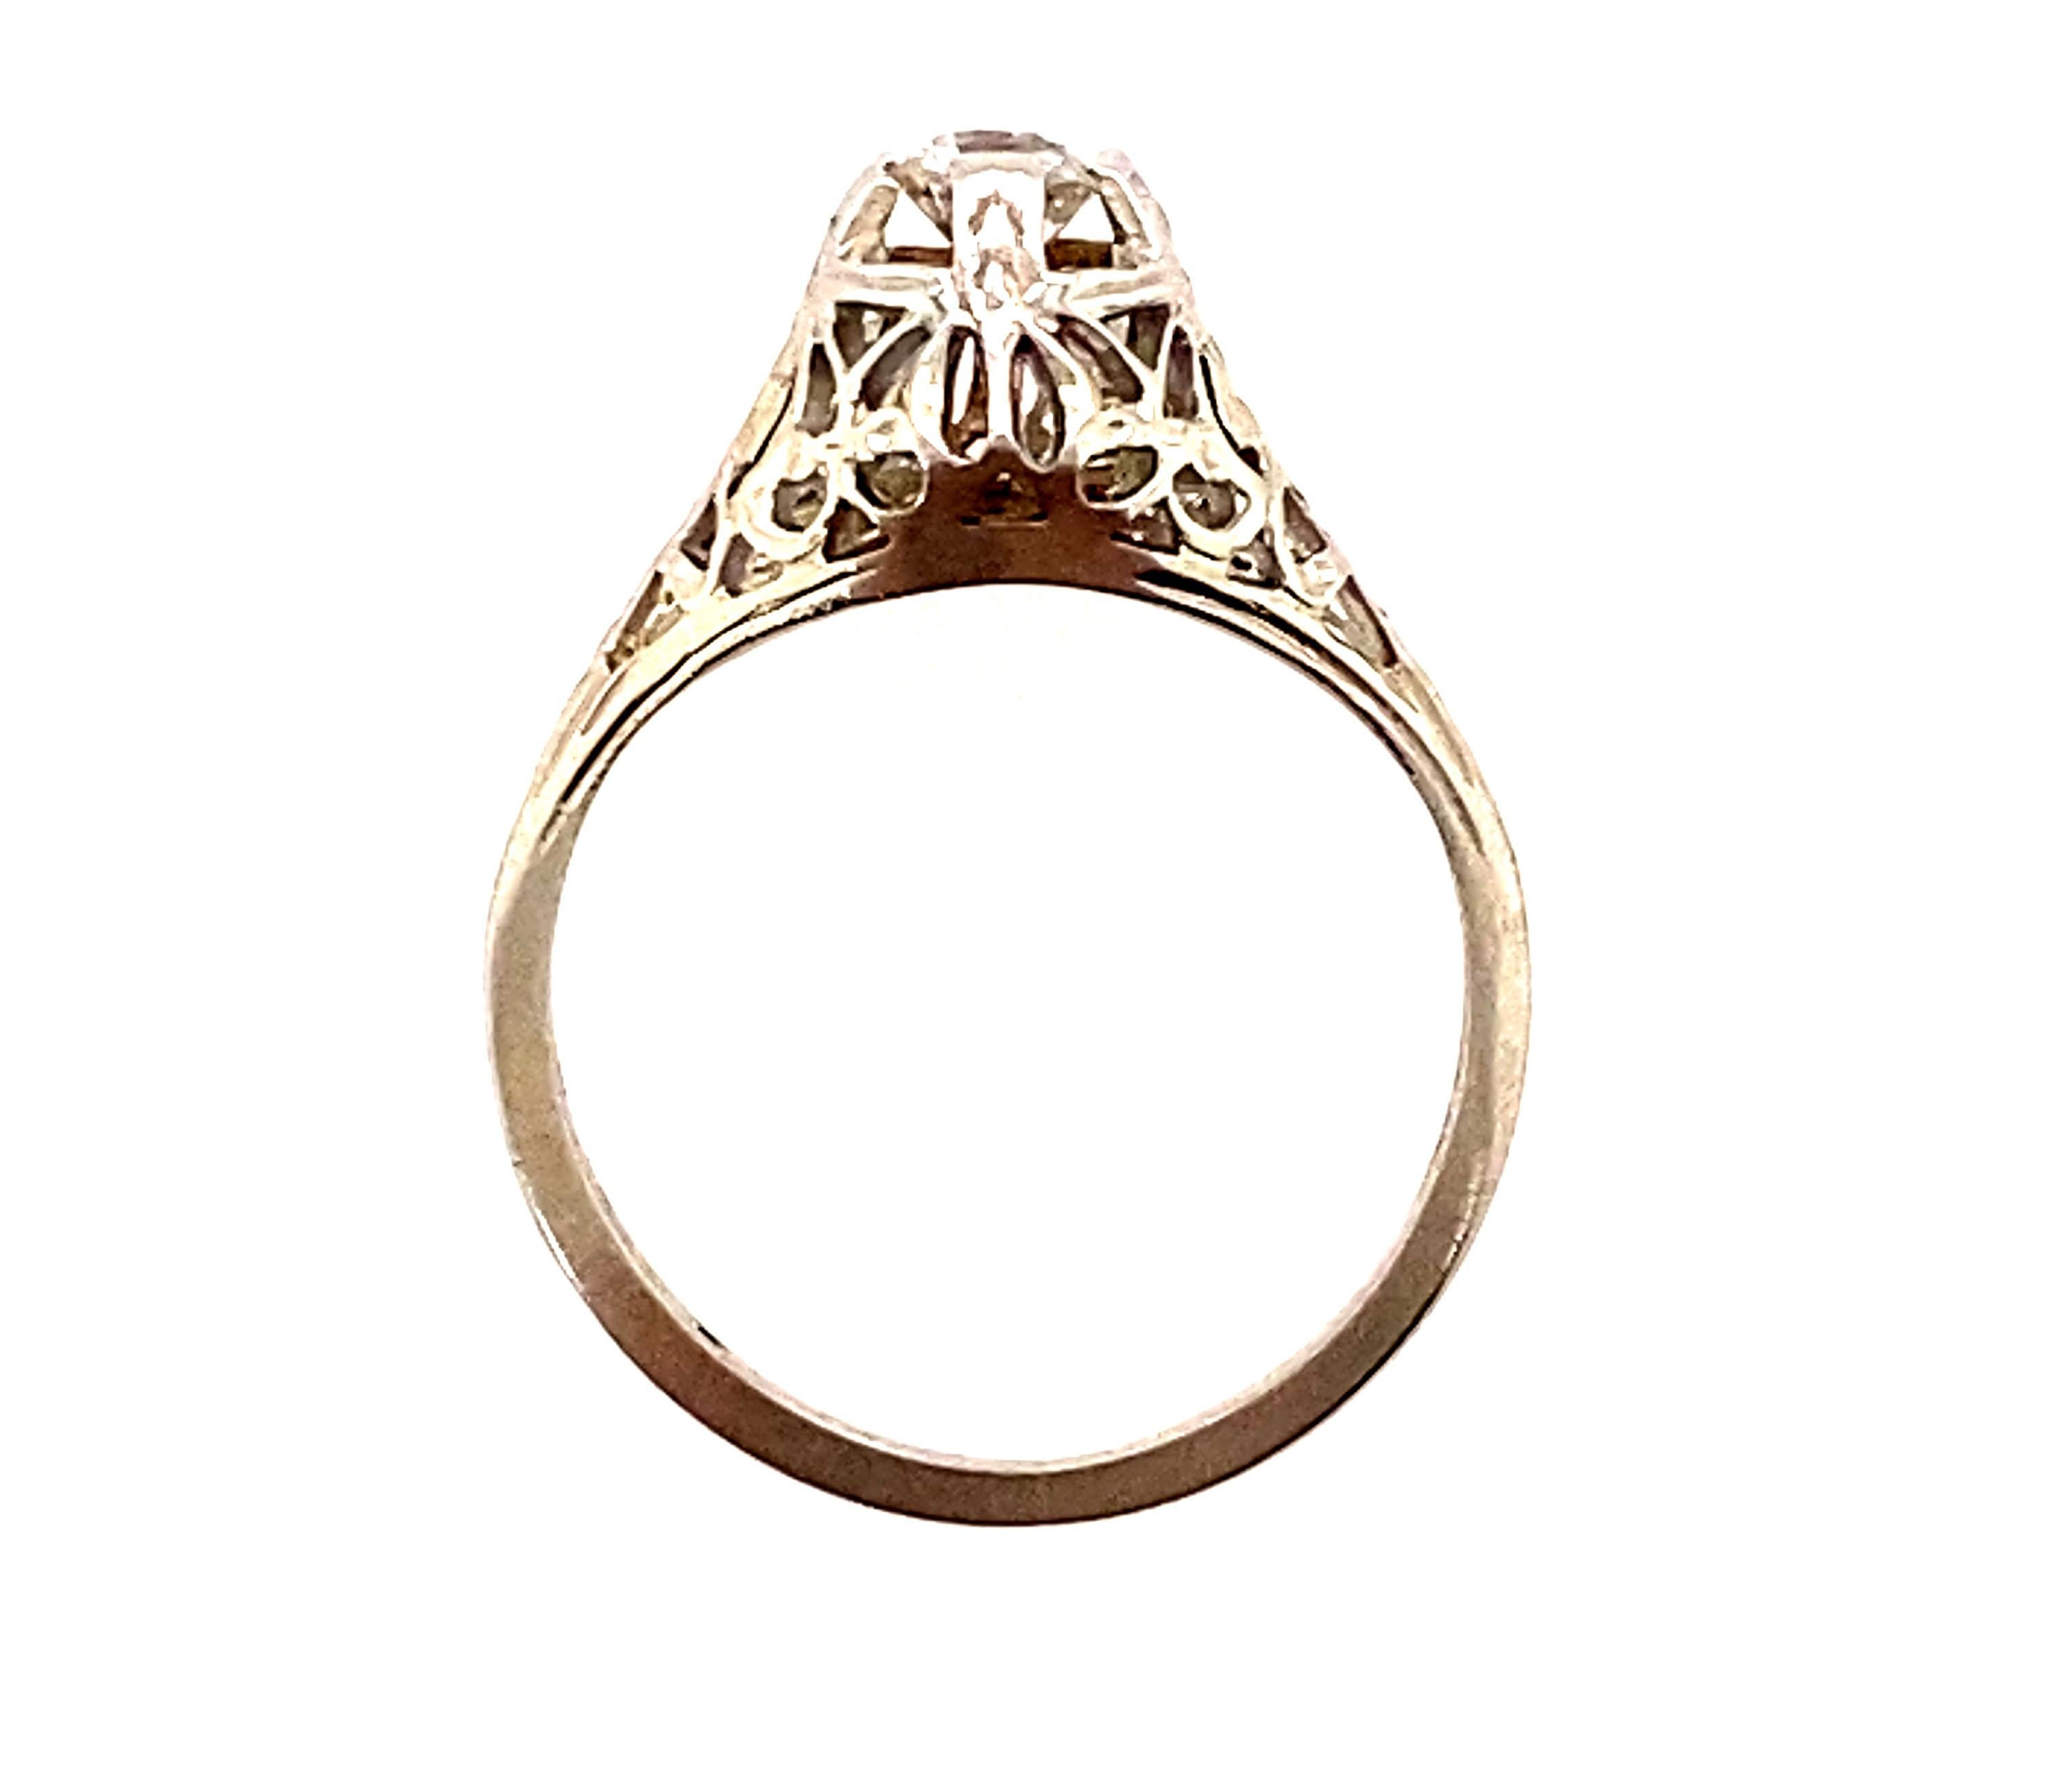 Genuine Original Antique from 1920's-1930's Solitaire Engagement Ring .25ct Old European Cut Diamond 18K White Gold 


Featuring a Scintillating Solo .25ct  H/SI1 Natural Mined Old European Cut Diamond

Belais Brothers Ring, First Jewelers in the